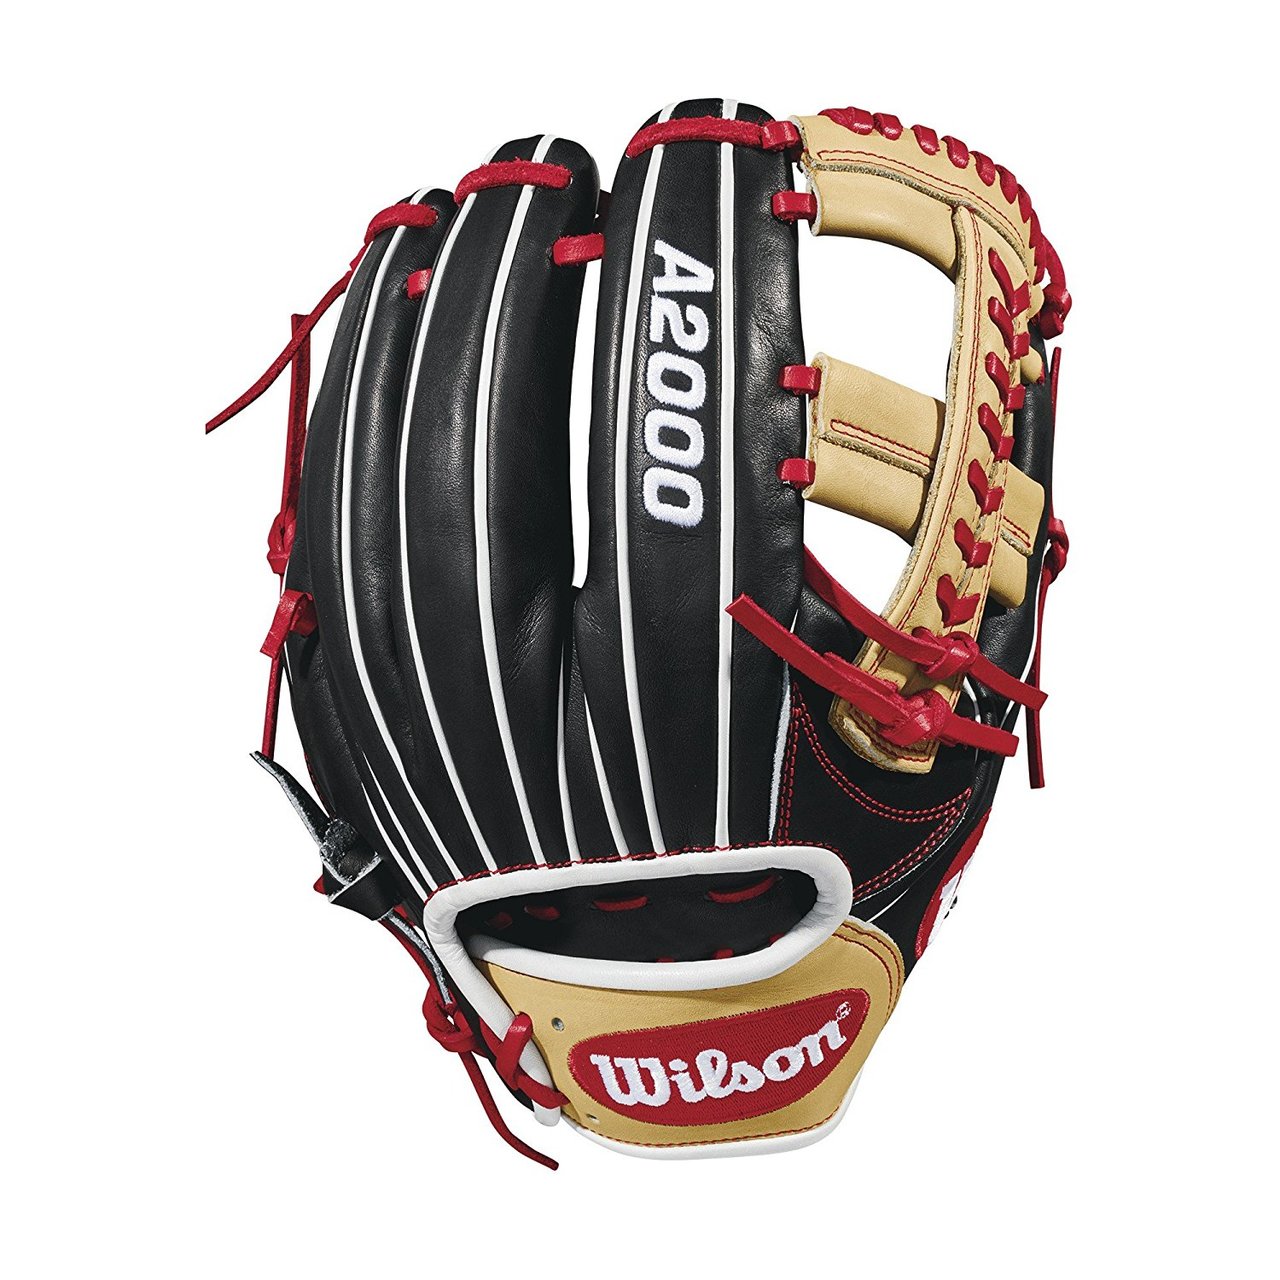 wilson-2018-a2000-1785-infield-baseball-glove-right-hand-throw-11-75 WTA20RB181785-RightHandThrow Wilson 887768614645 11.75 Cross web with Baseball stitch New pattern featuring gap welting